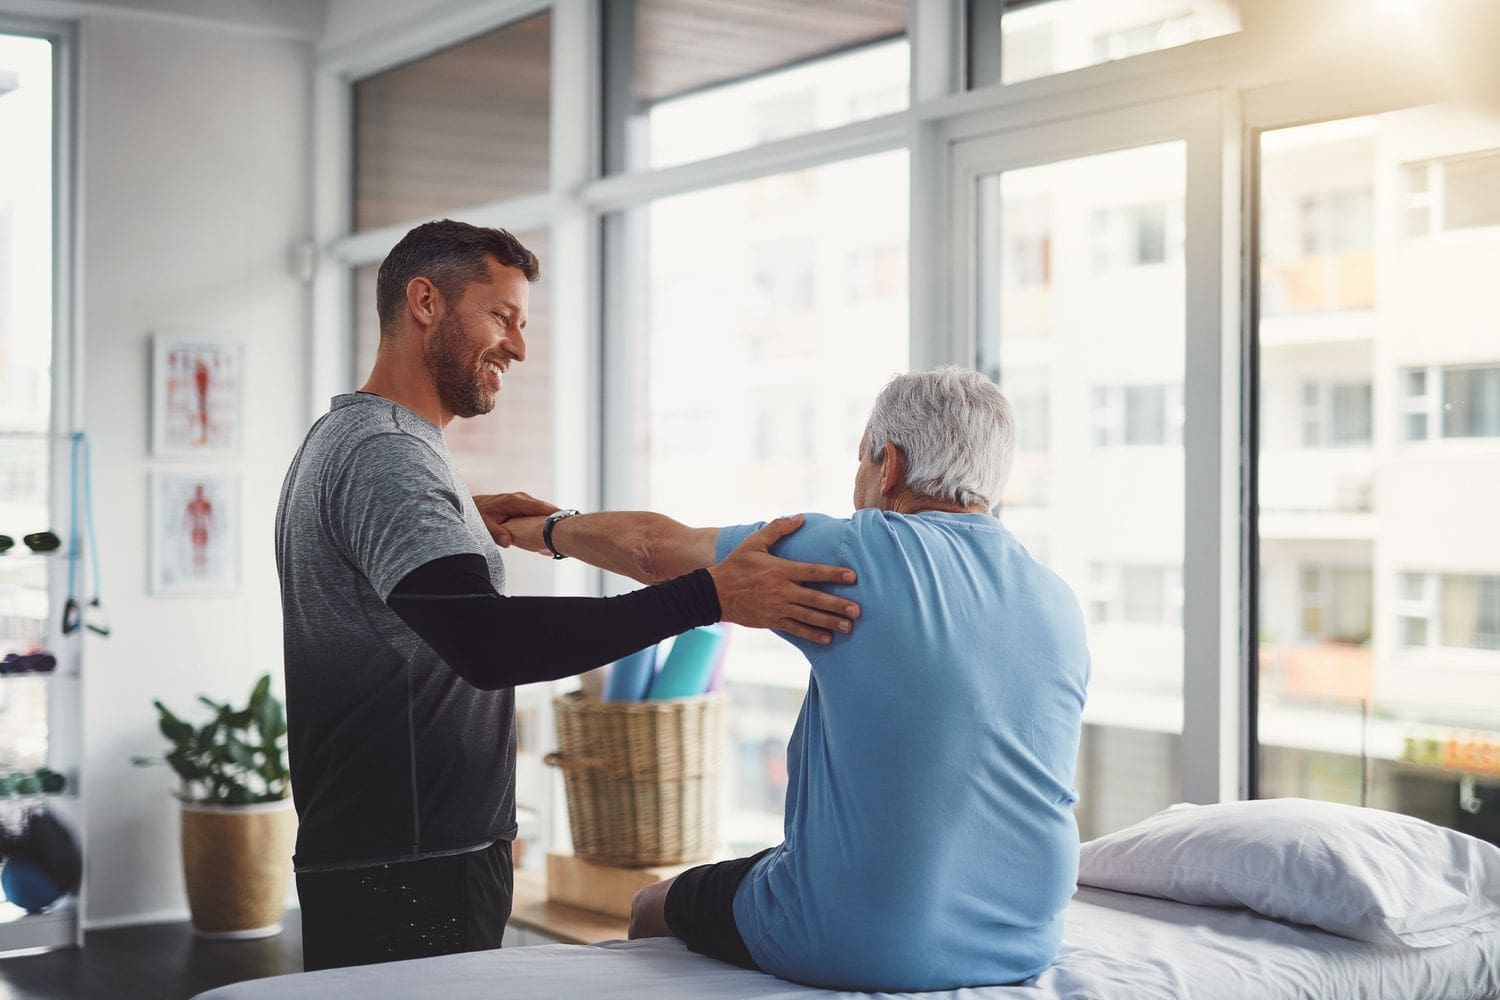 Is Physical Therapy Covered by Insurance?